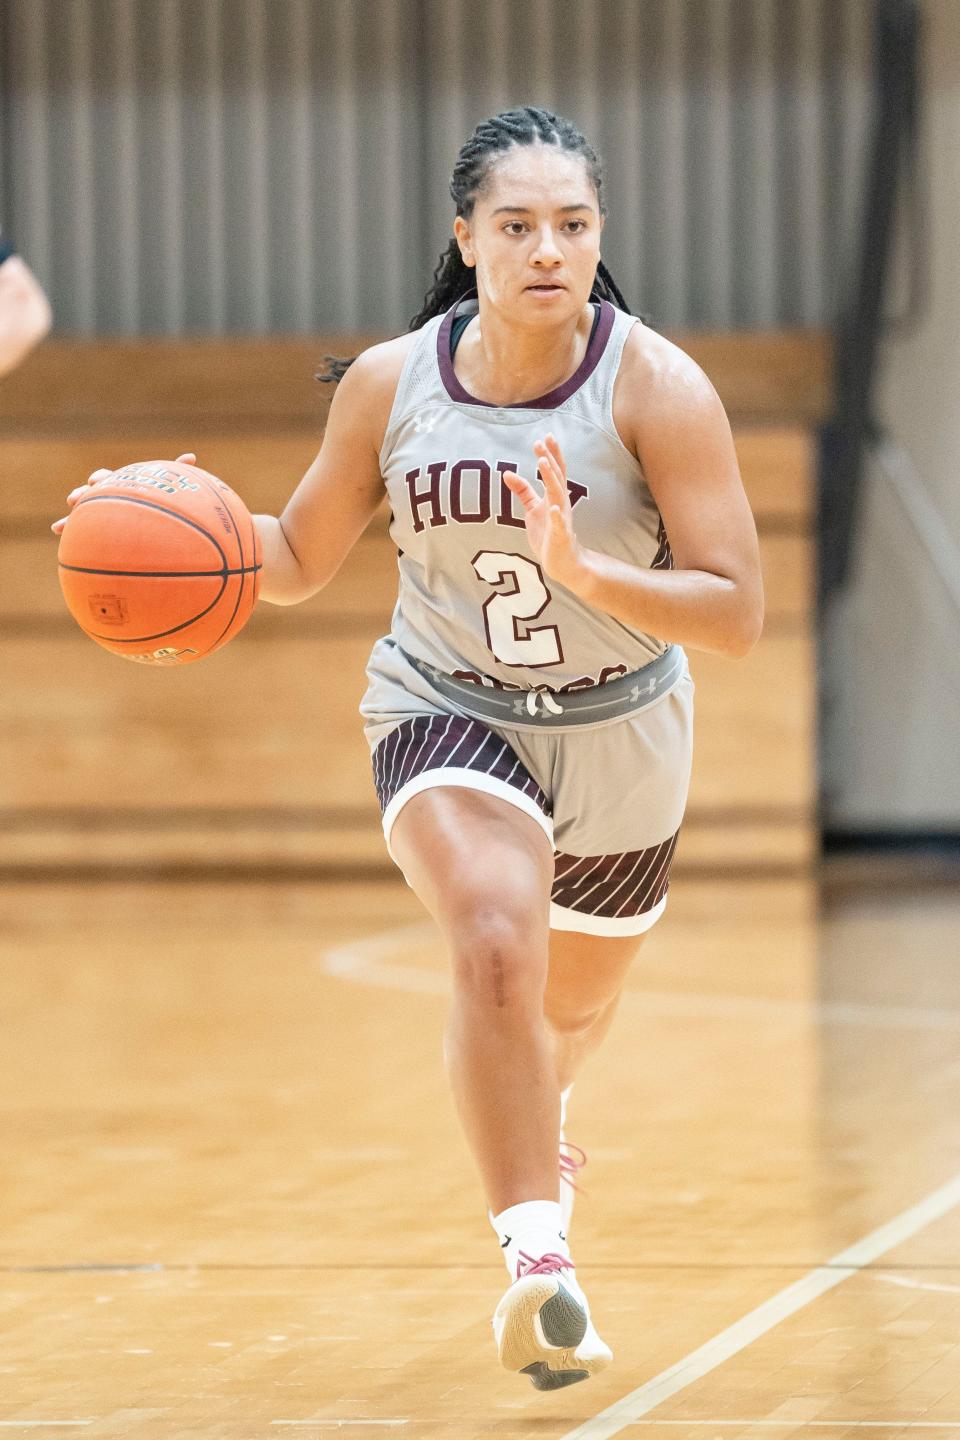 Former Penn player Jordyn Smith is part of a trio of former local prep talent helping the Holy Cross women's basketball team to new heights this season.